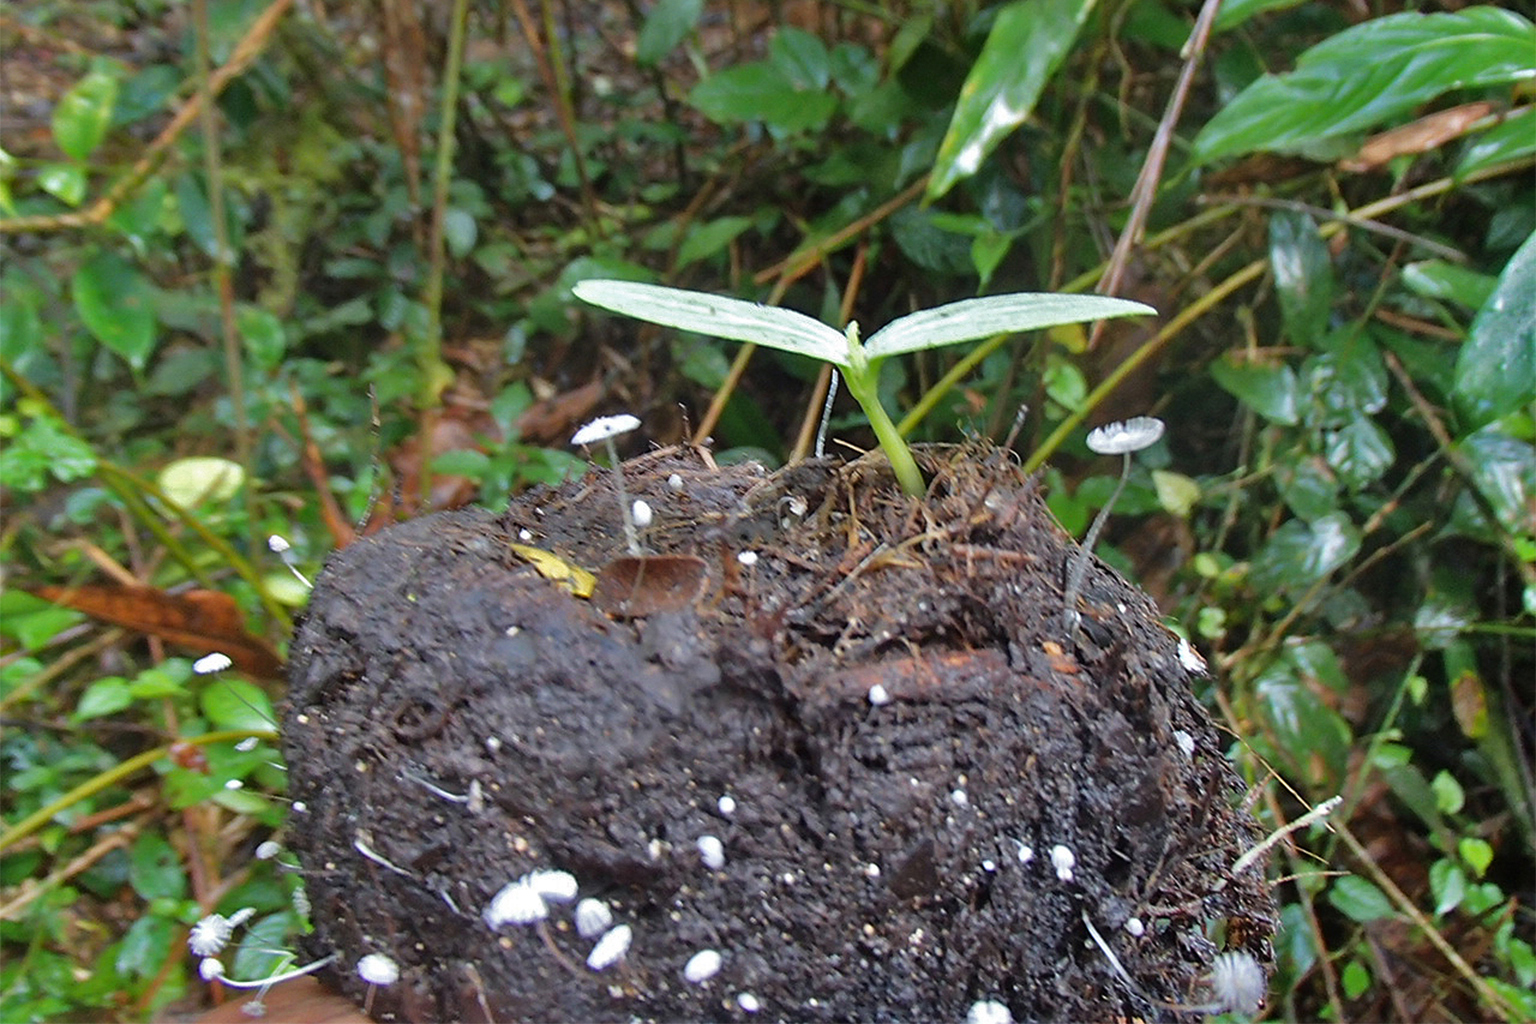 A plant and mushrooms growing on gorilla feces. 